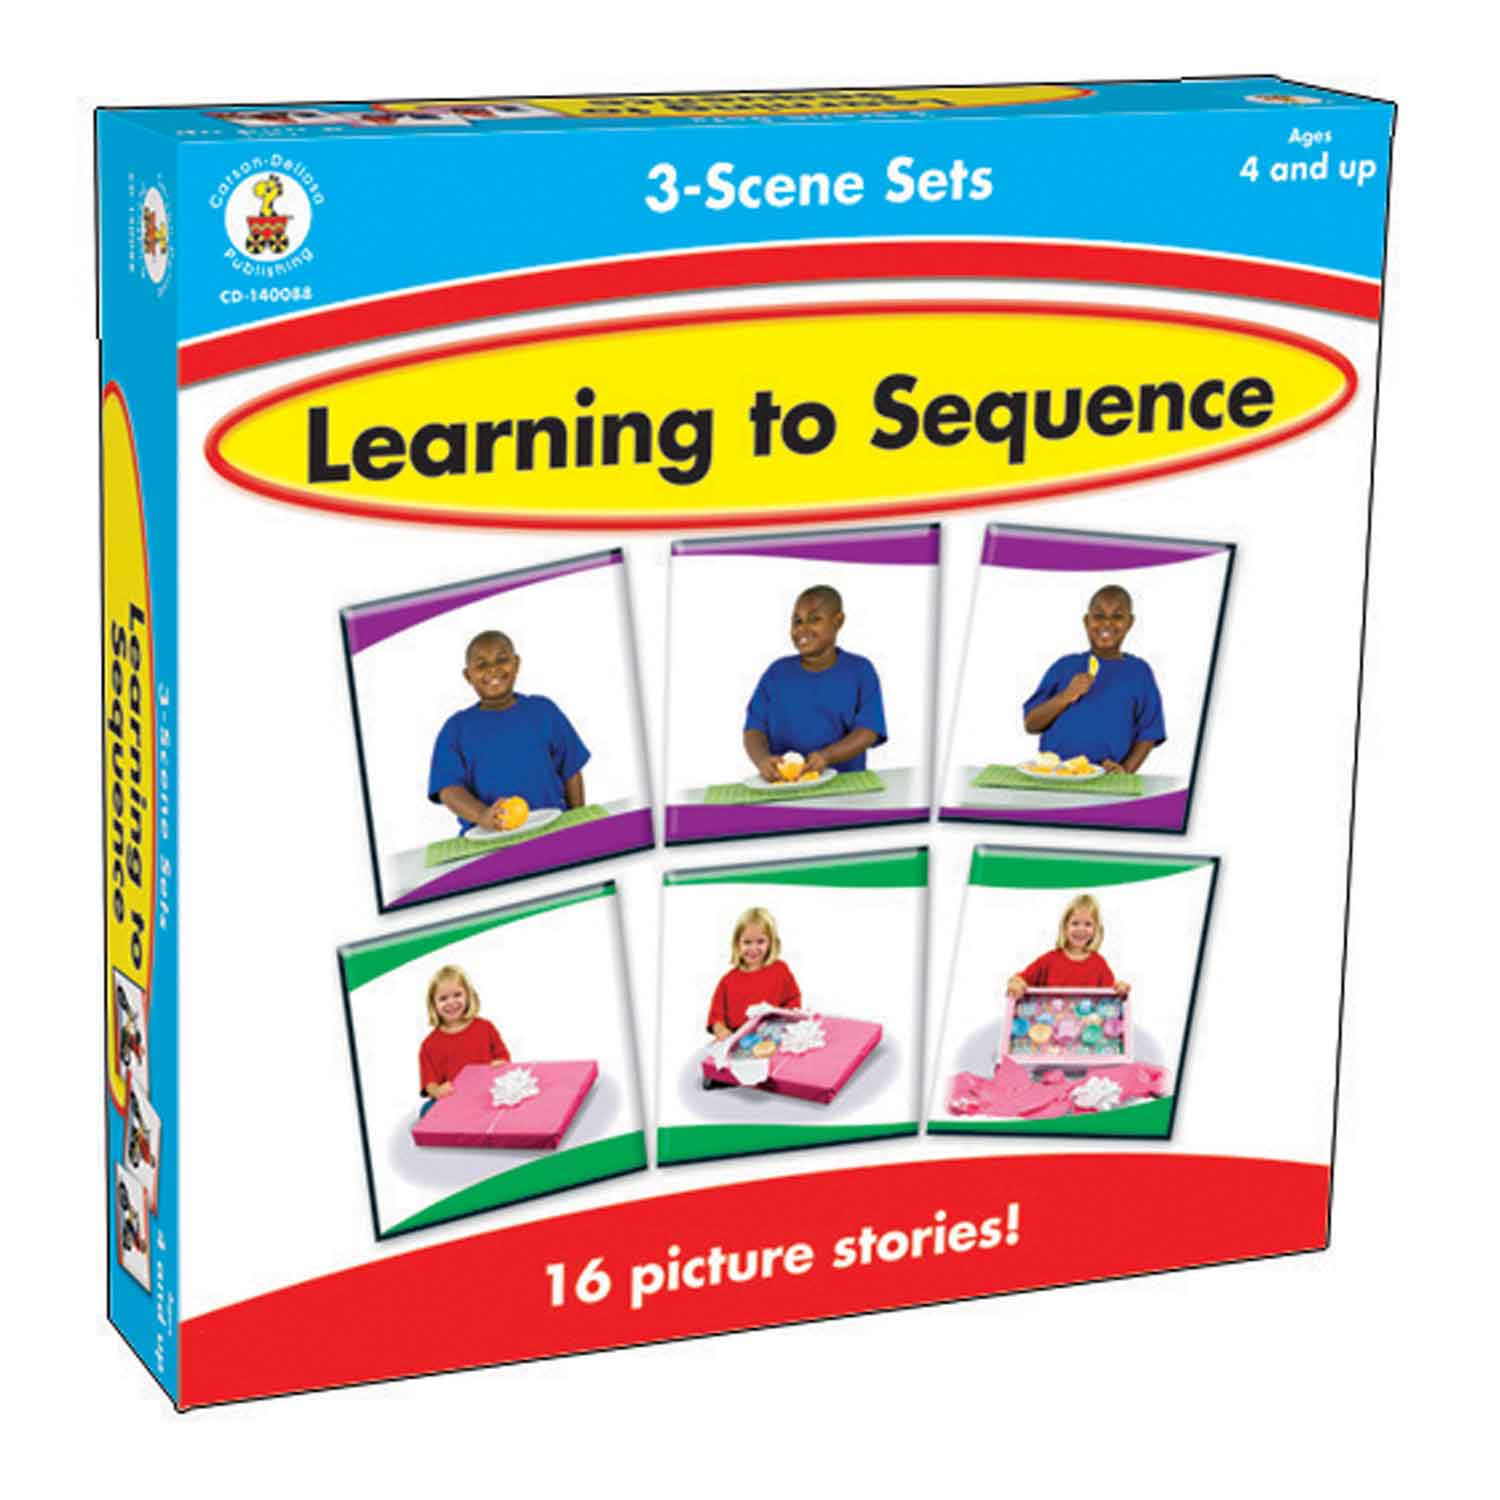 Learning To Sequence, 3-Scene Game